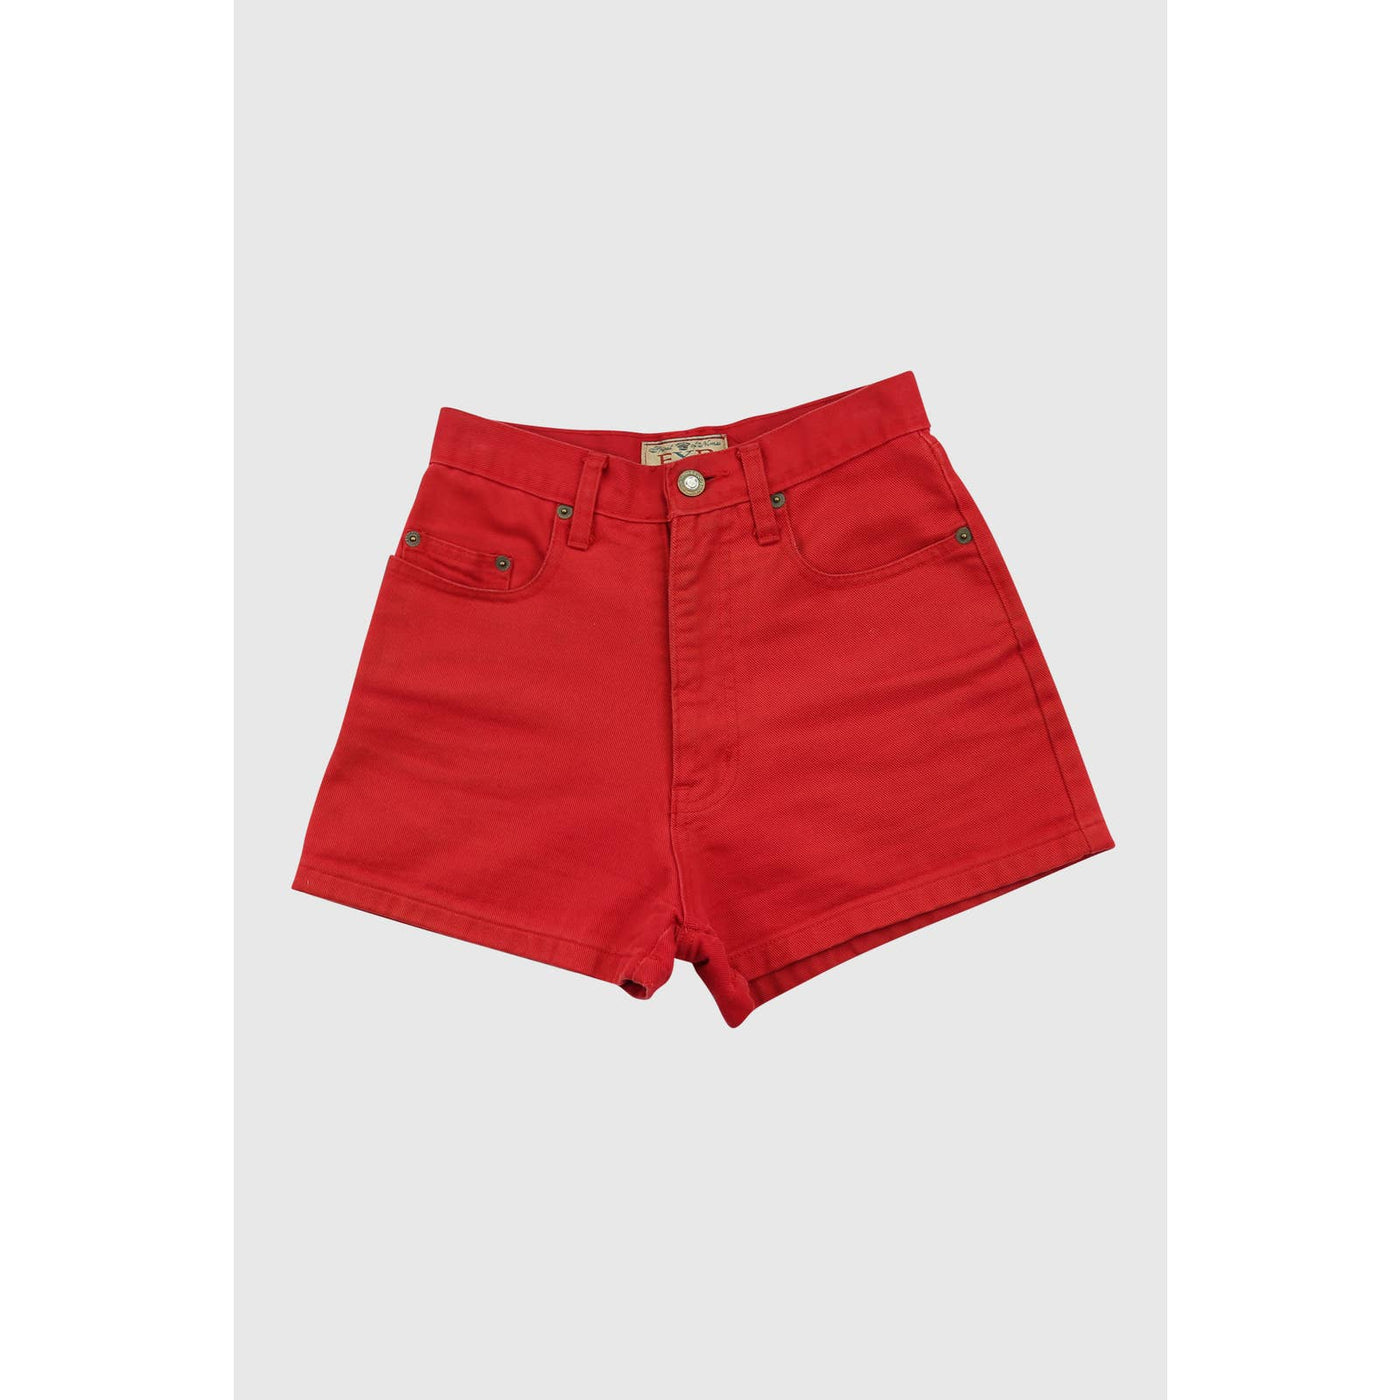 Vintage Express Red High Waisted Shorts